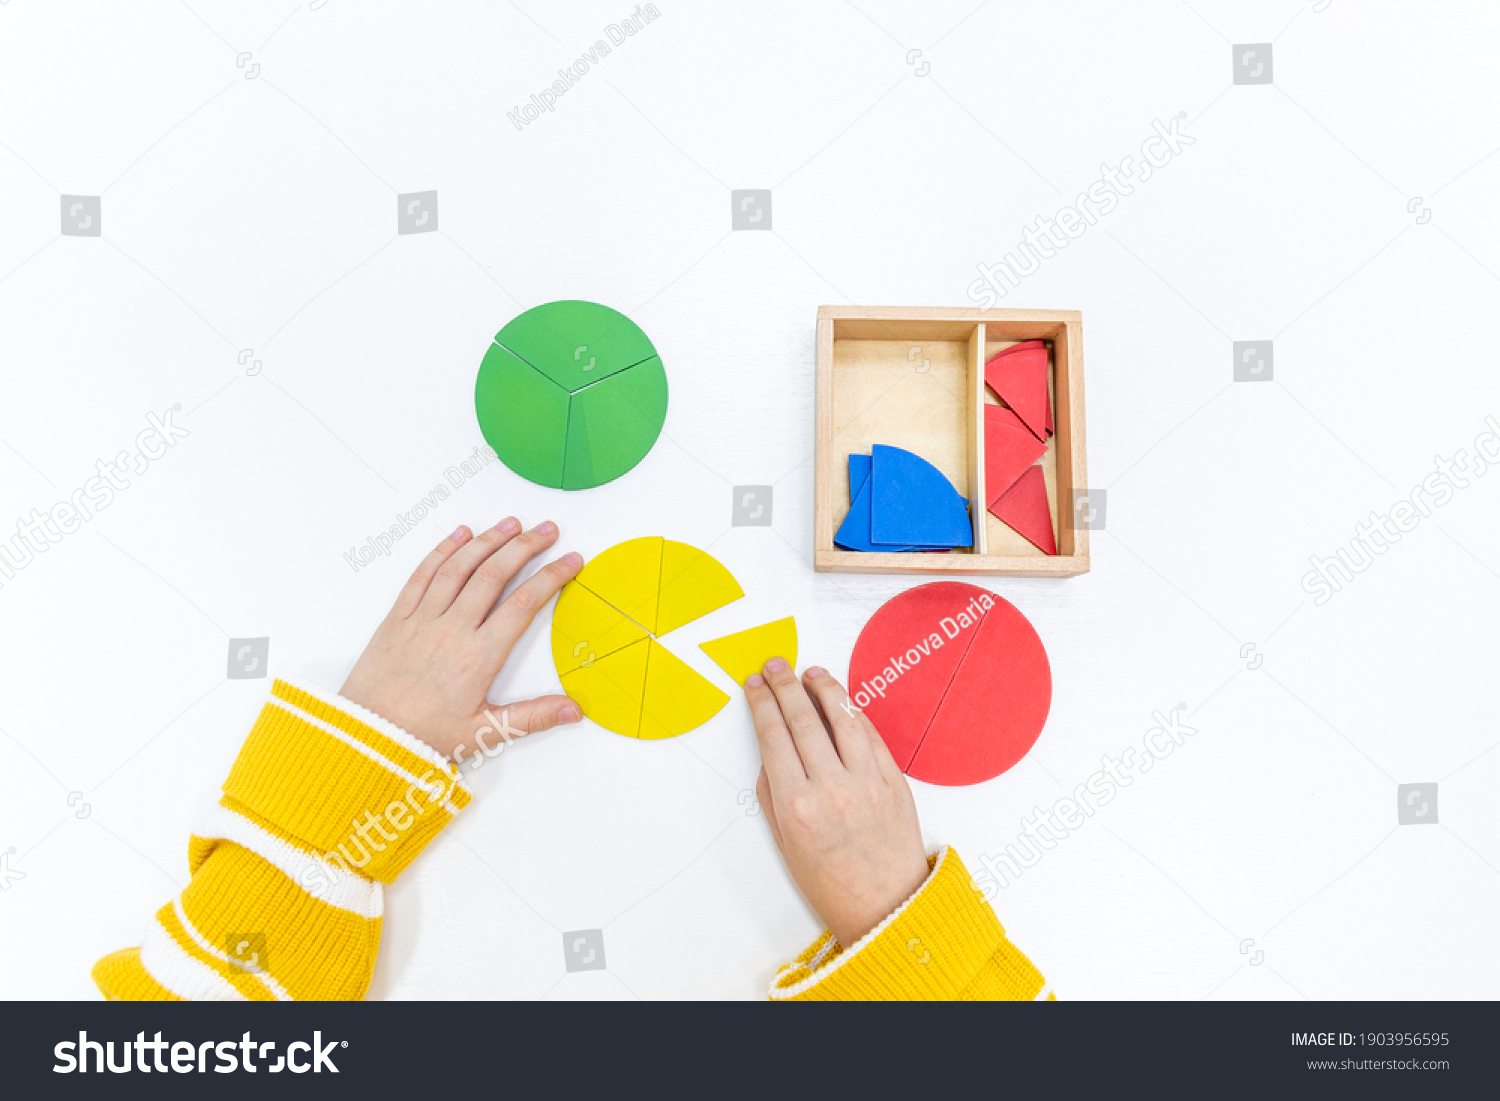 Top view of girls hand is playing and sorting a puzzle of colored wooden geometric shapes in montessori school. Concept of using a mathematical geometry learning resources for children education. #1903956595